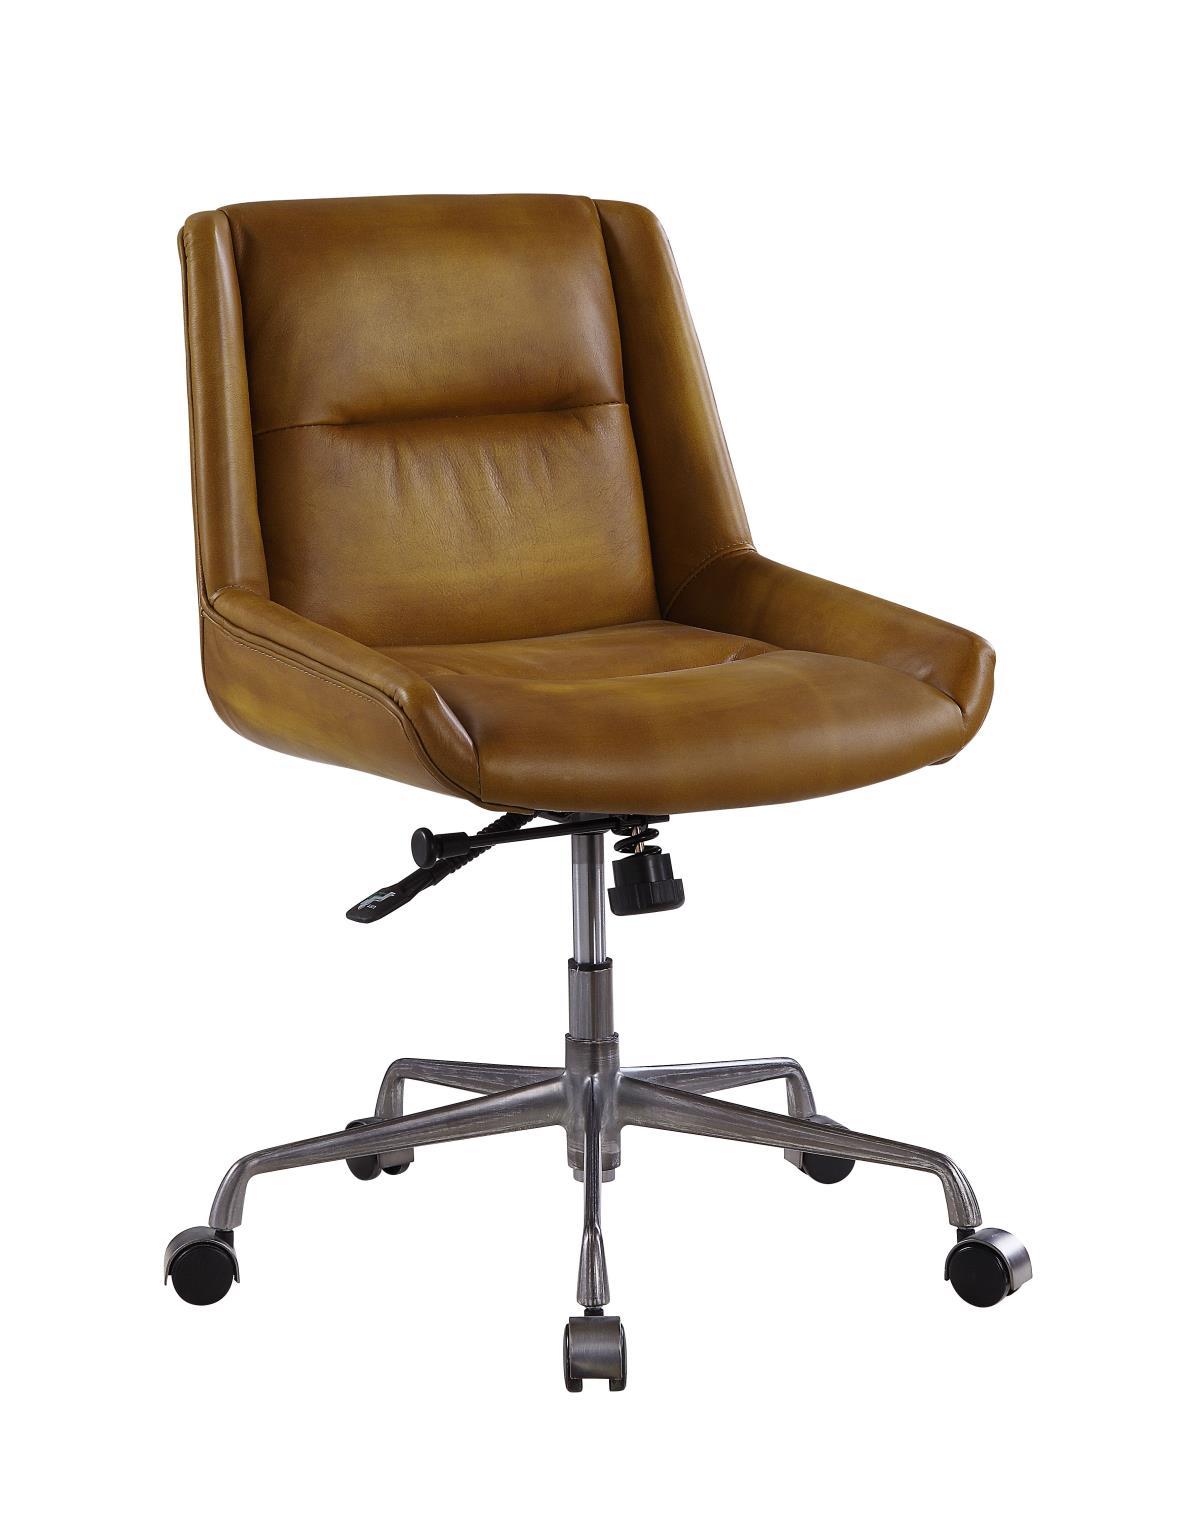 

    
Home Office Executive Chair Saddle Brown Genuine Leather Ambler Acme Traditional
